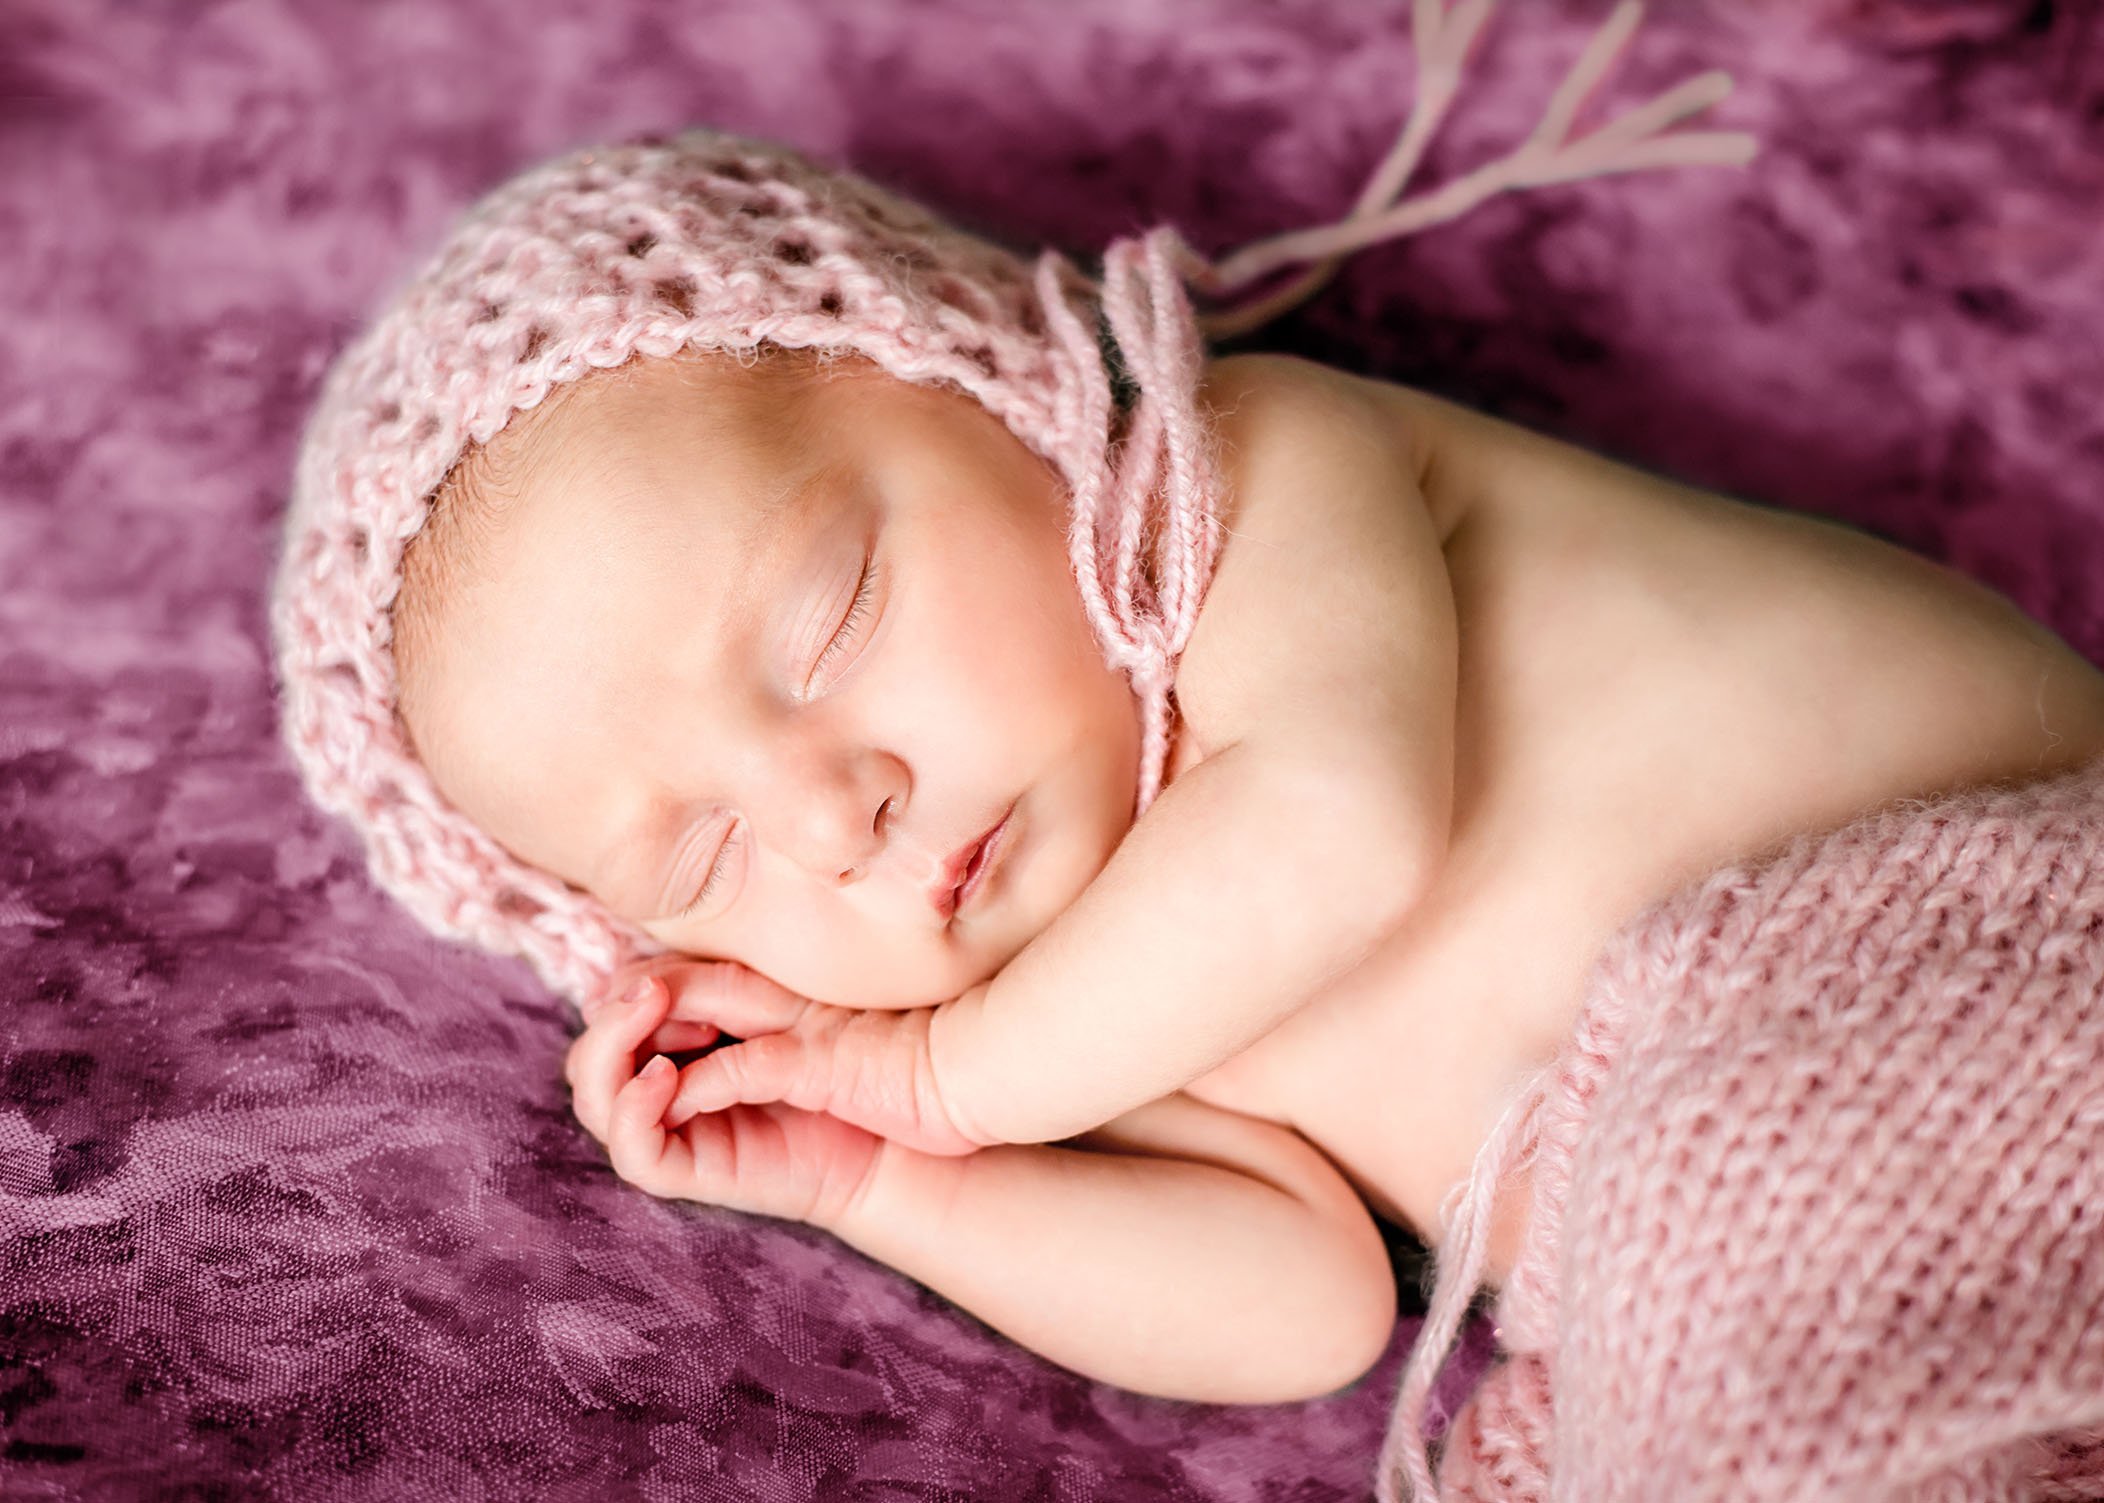 newborn baby girl with pink bonnet and knit pants sleeping on purple bedding